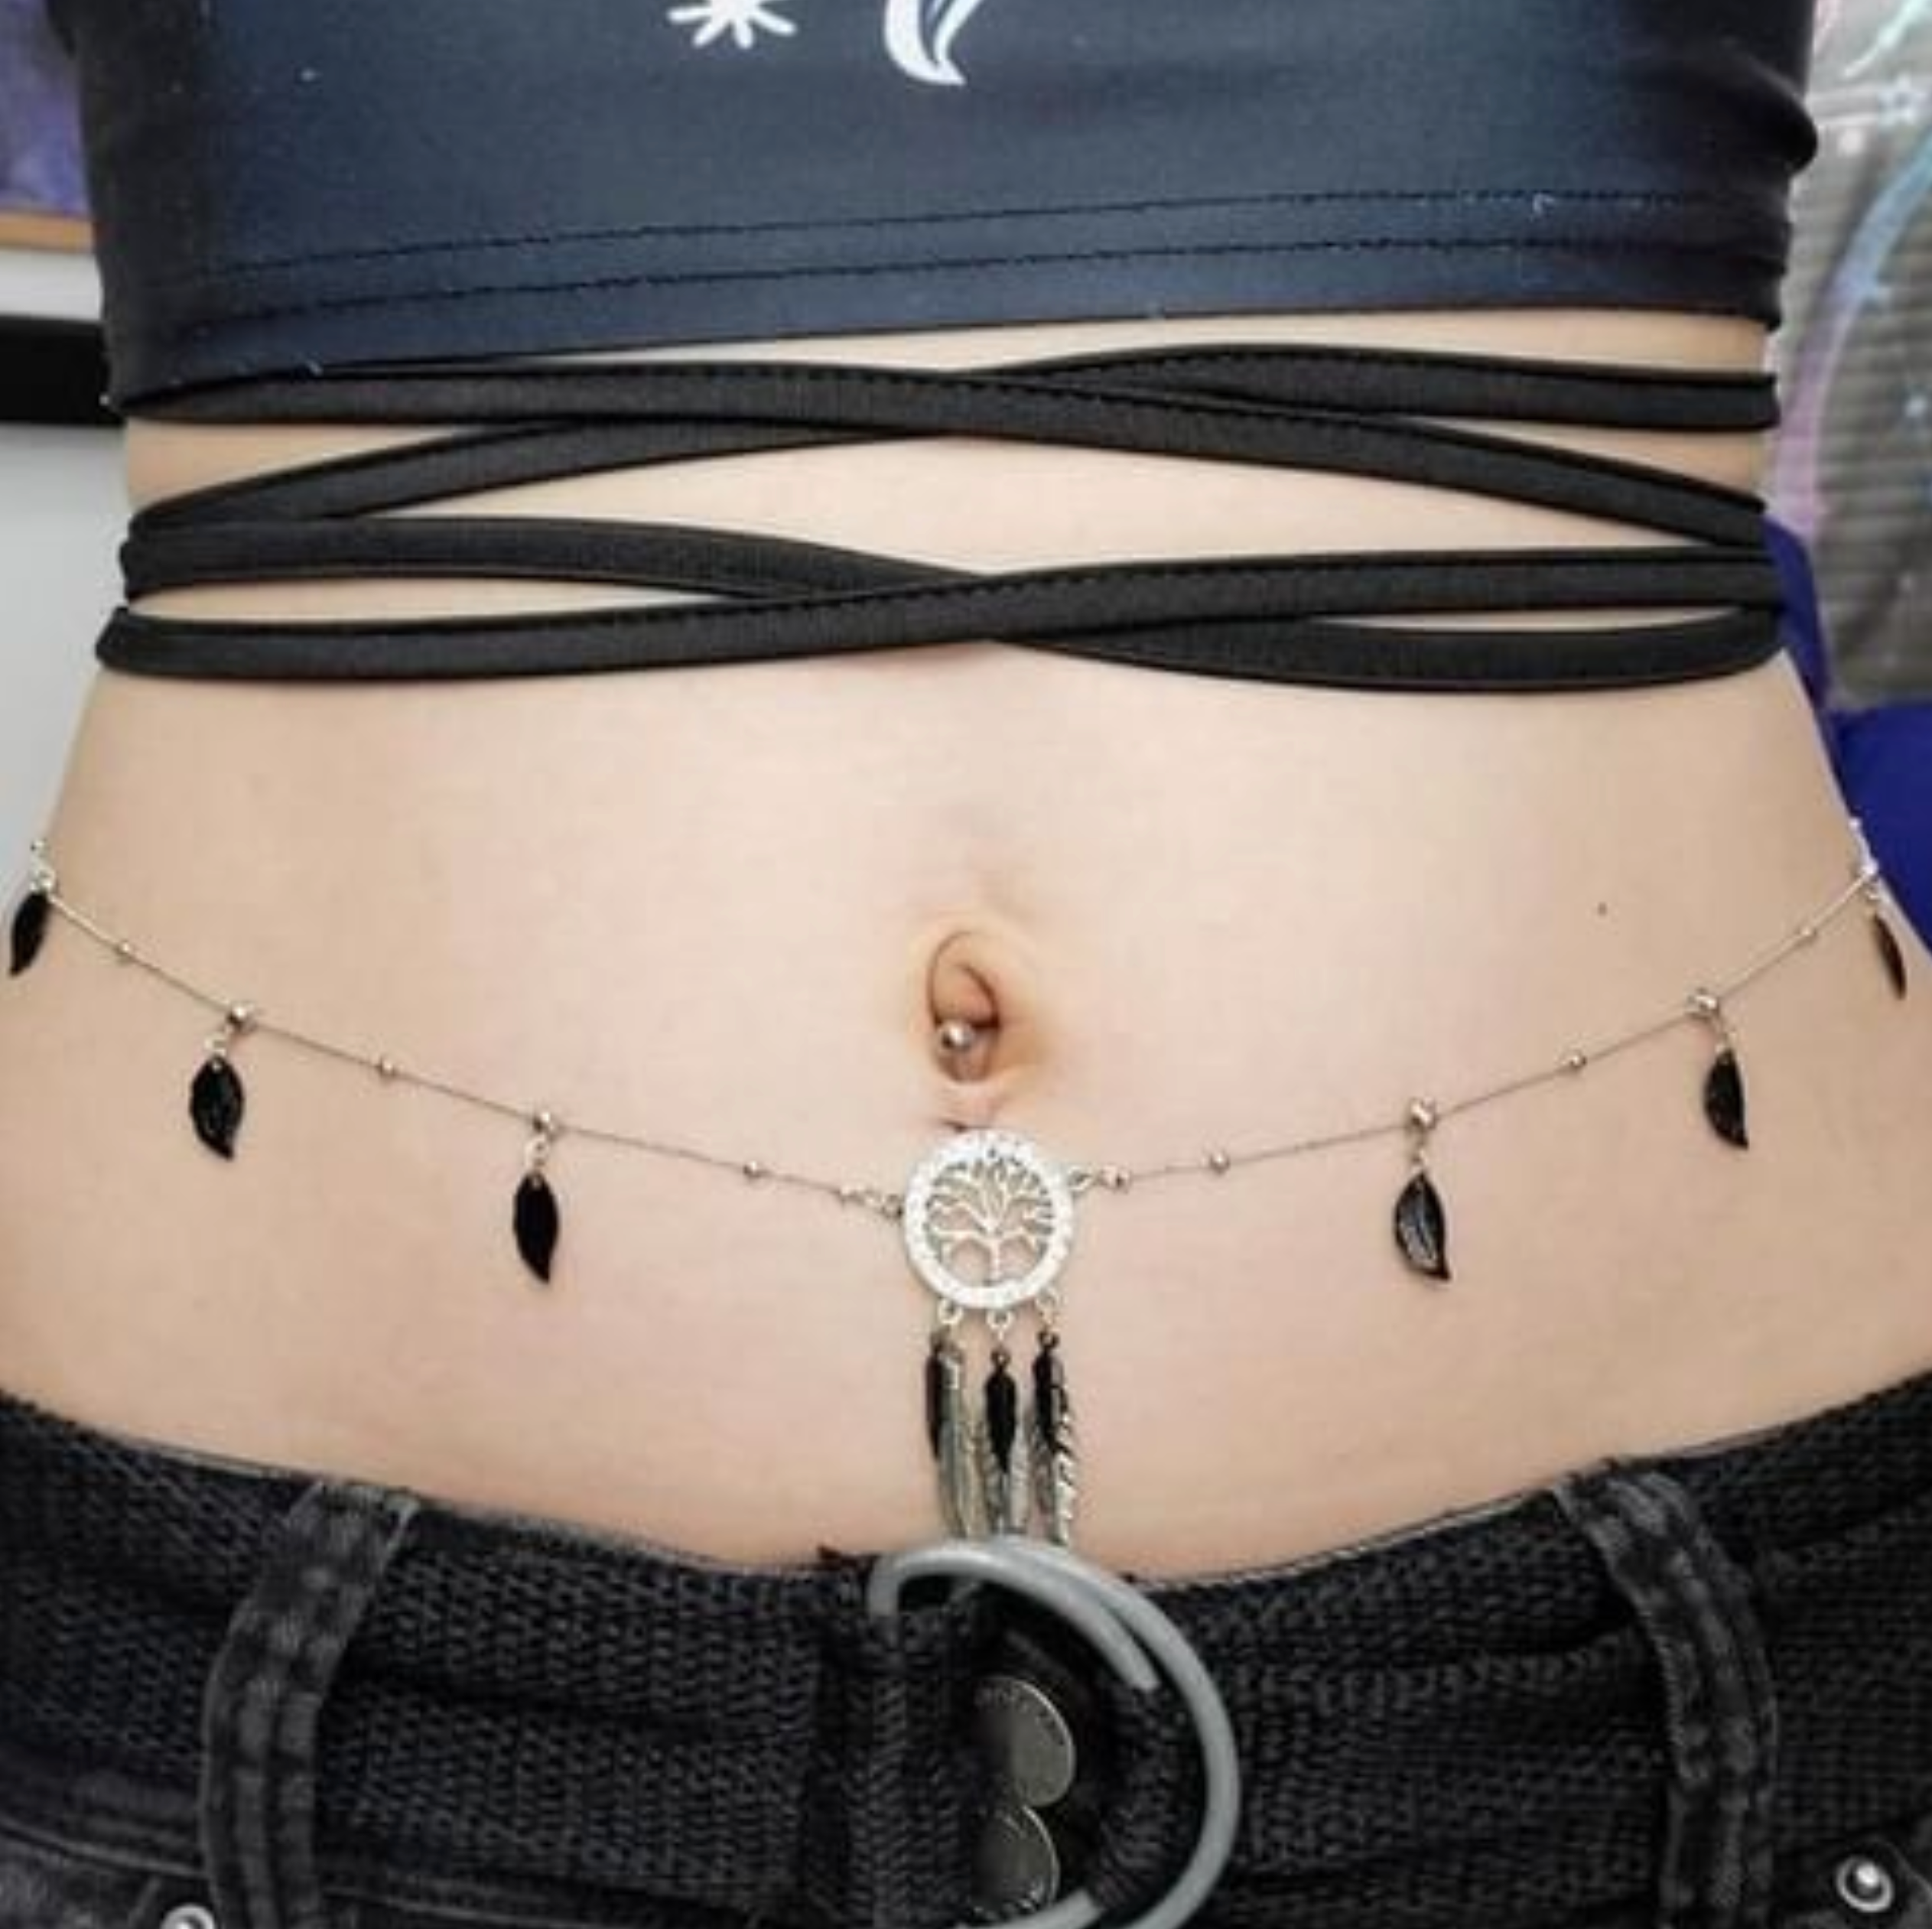 Summer Piercing Trends That Have A Chokehold On Us